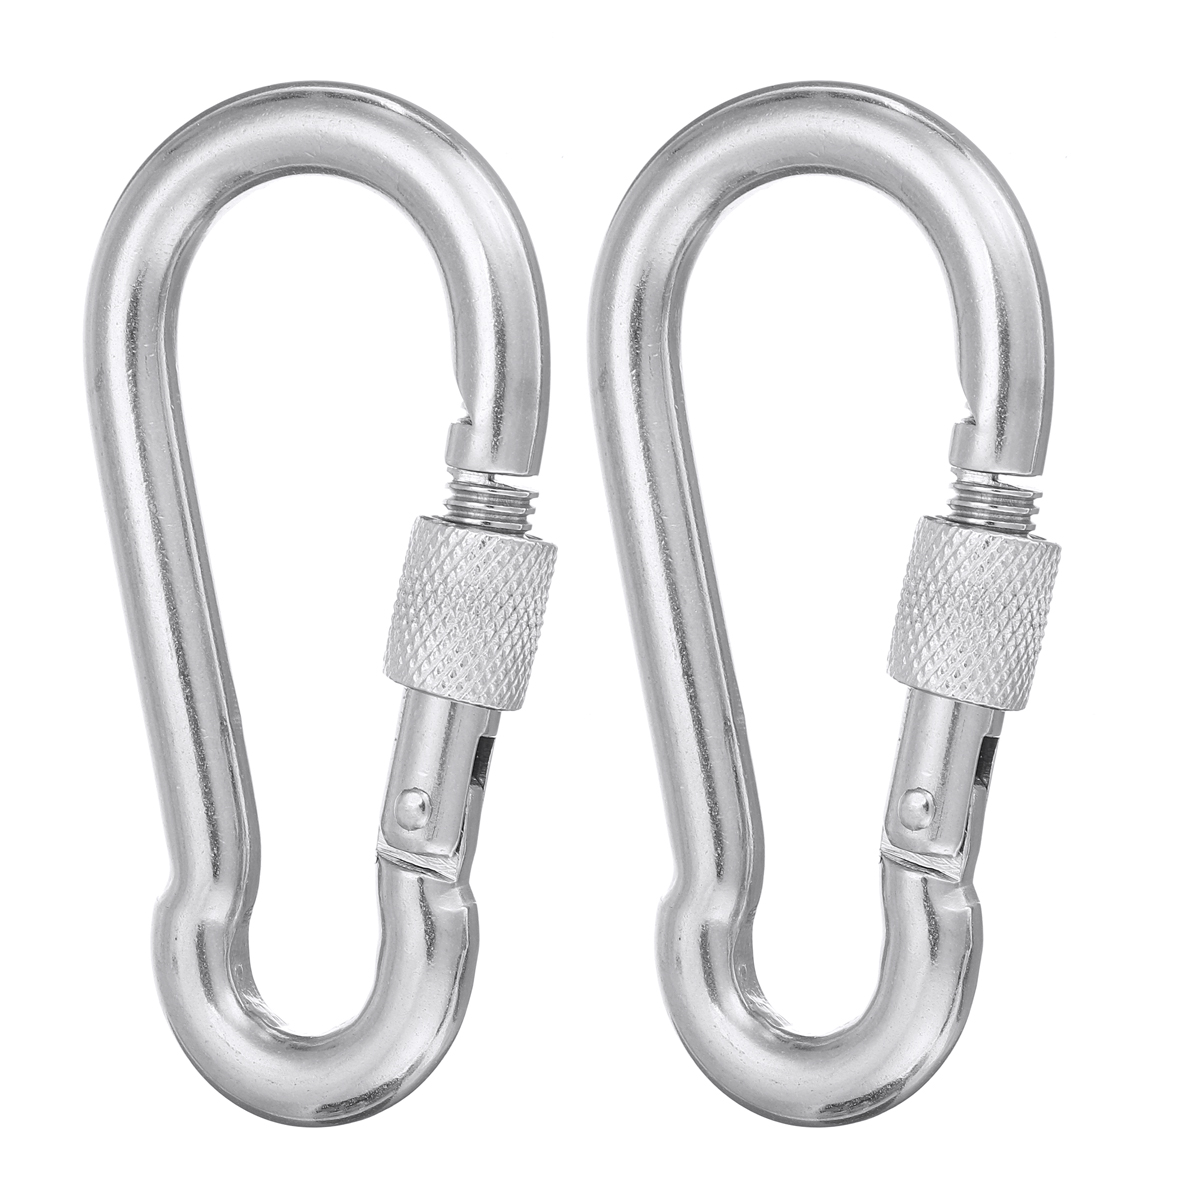 13Pcs-Hammock-Chair-Hanging-Basket-Accessories-Stainless-Steel-Fixed-Buckles-1782407-7